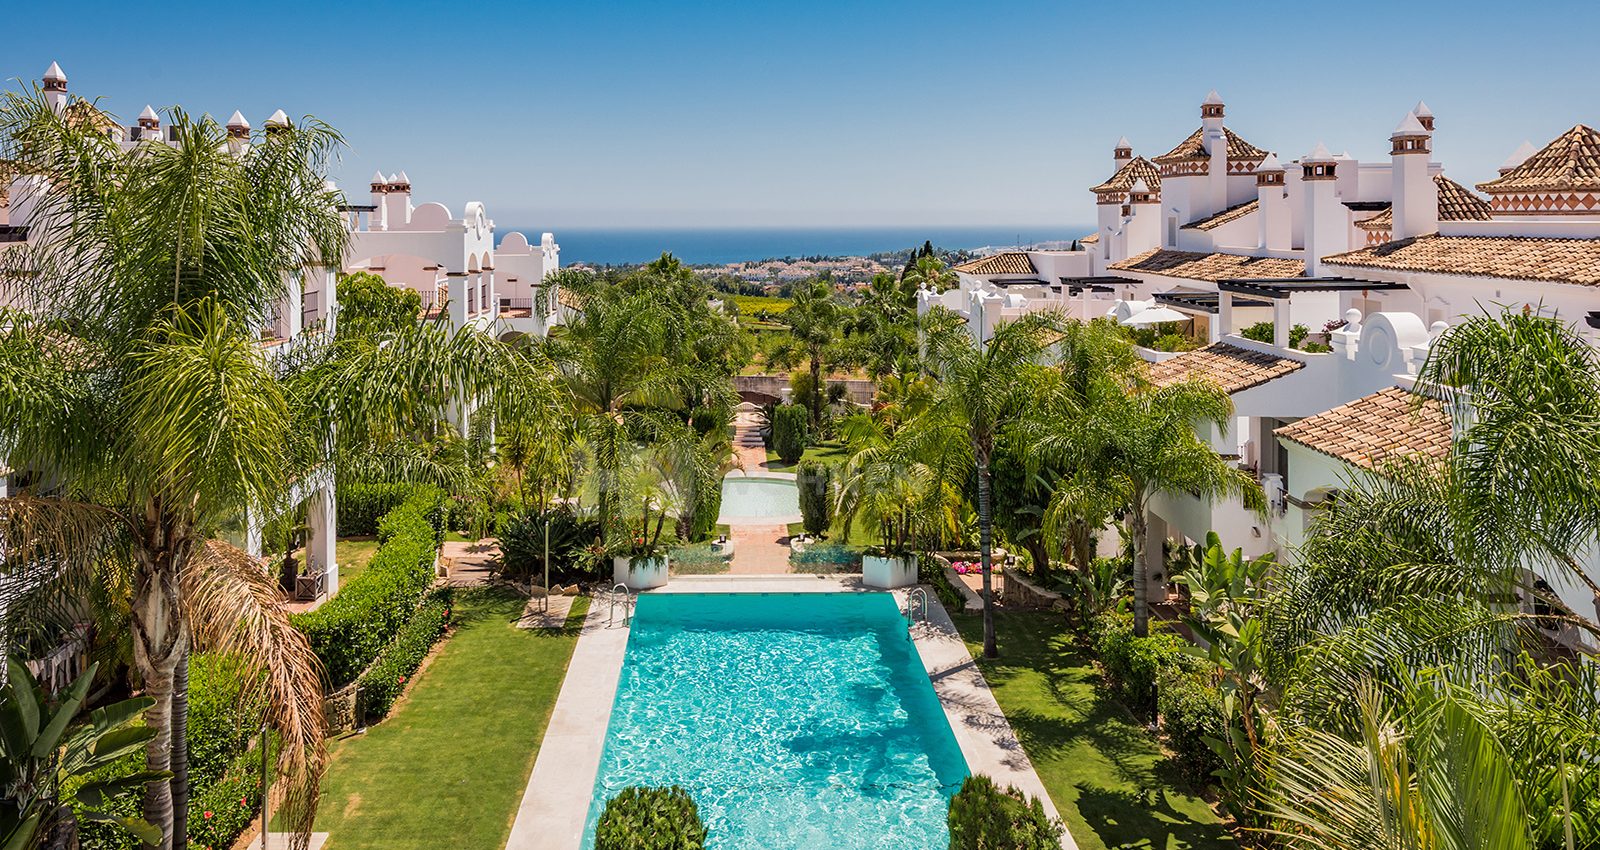 Apartments with amazing sea and mountain views in Sierra Blanca – Marbella